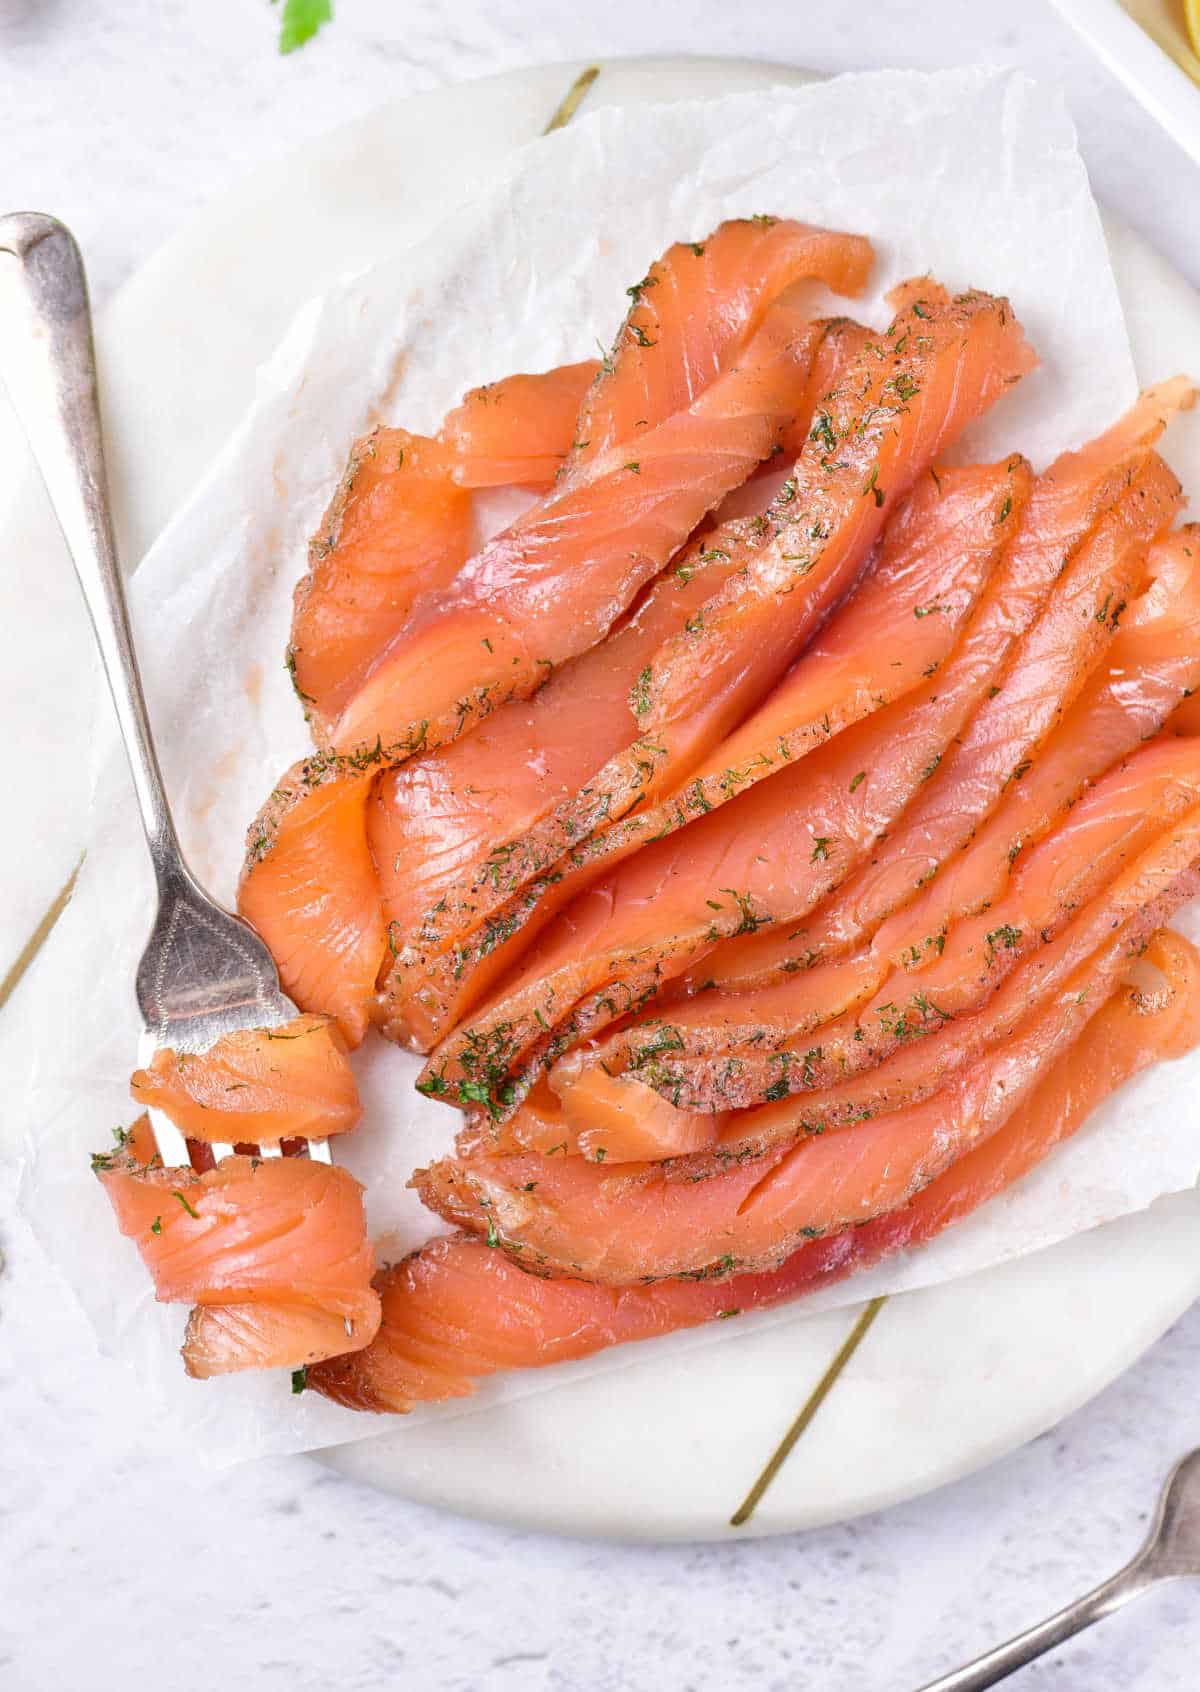 Slices of gravlax on a white plate with silver fork. White surface. 